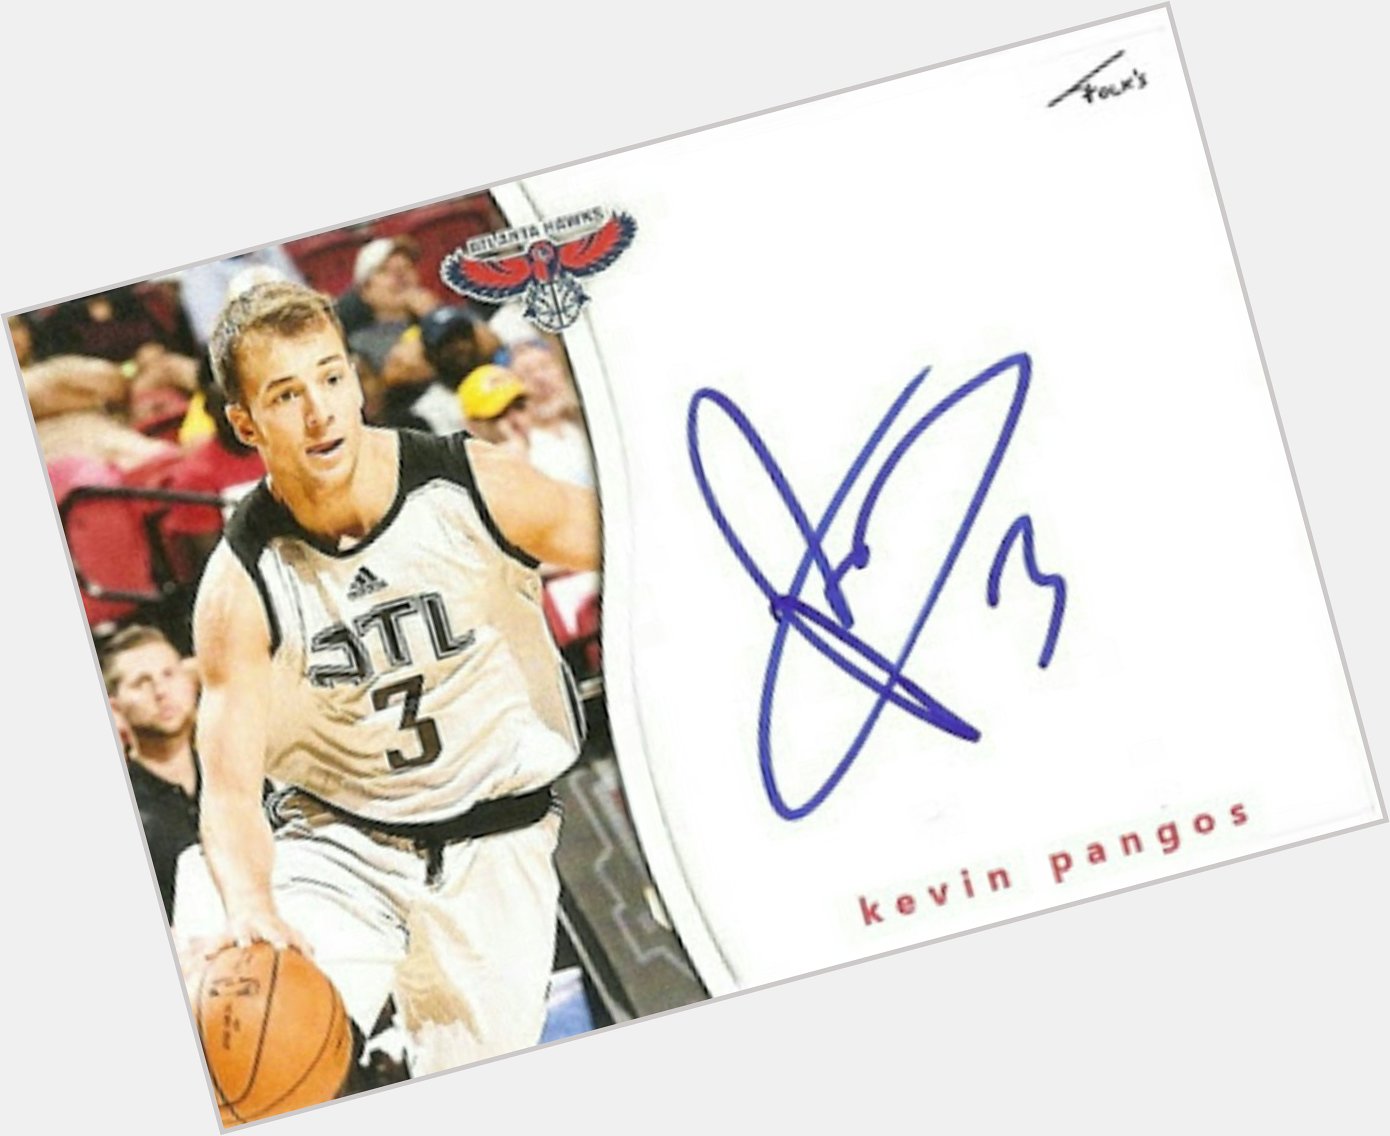 Happy Birthday to Kevin Pangos of who turns 25 today. Enjoy your day 